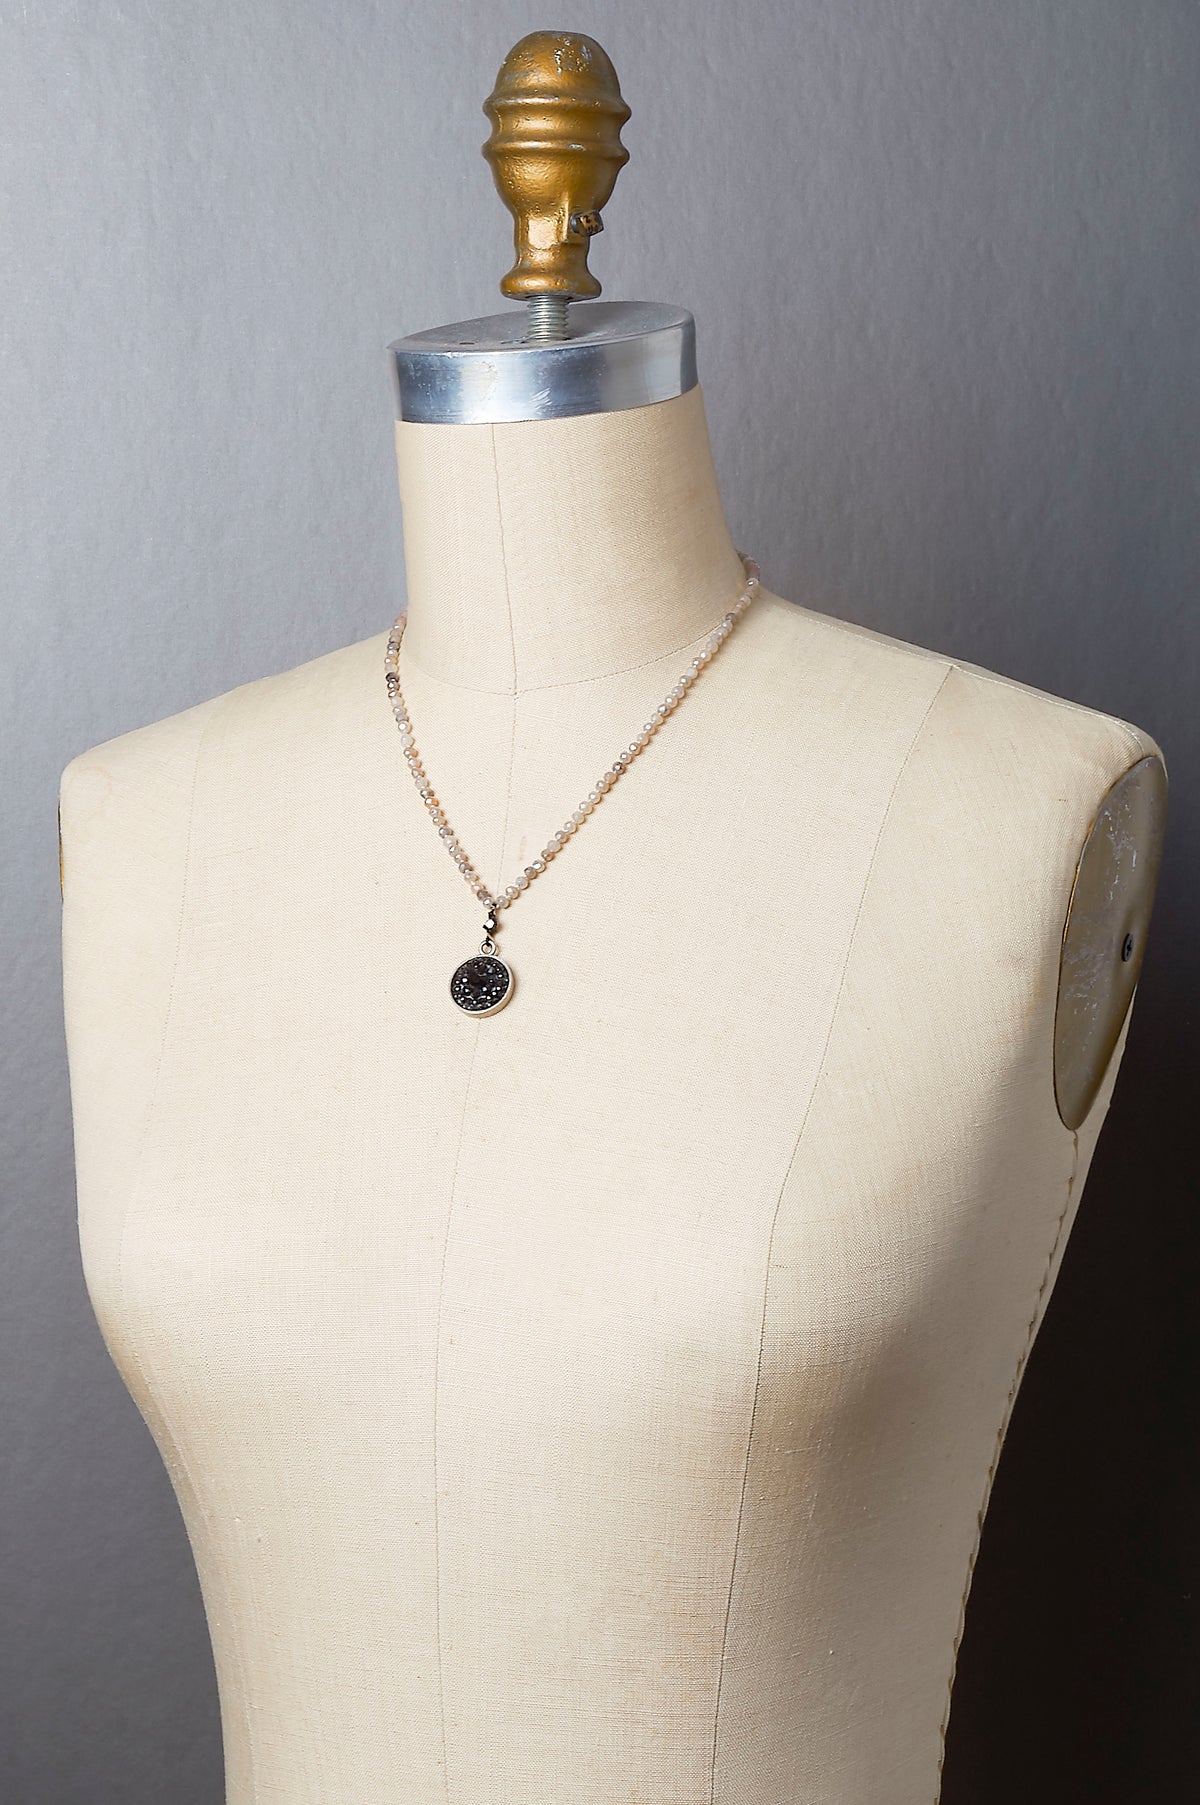 Black Onyx Iconic Necklace with Faceted Labradorite